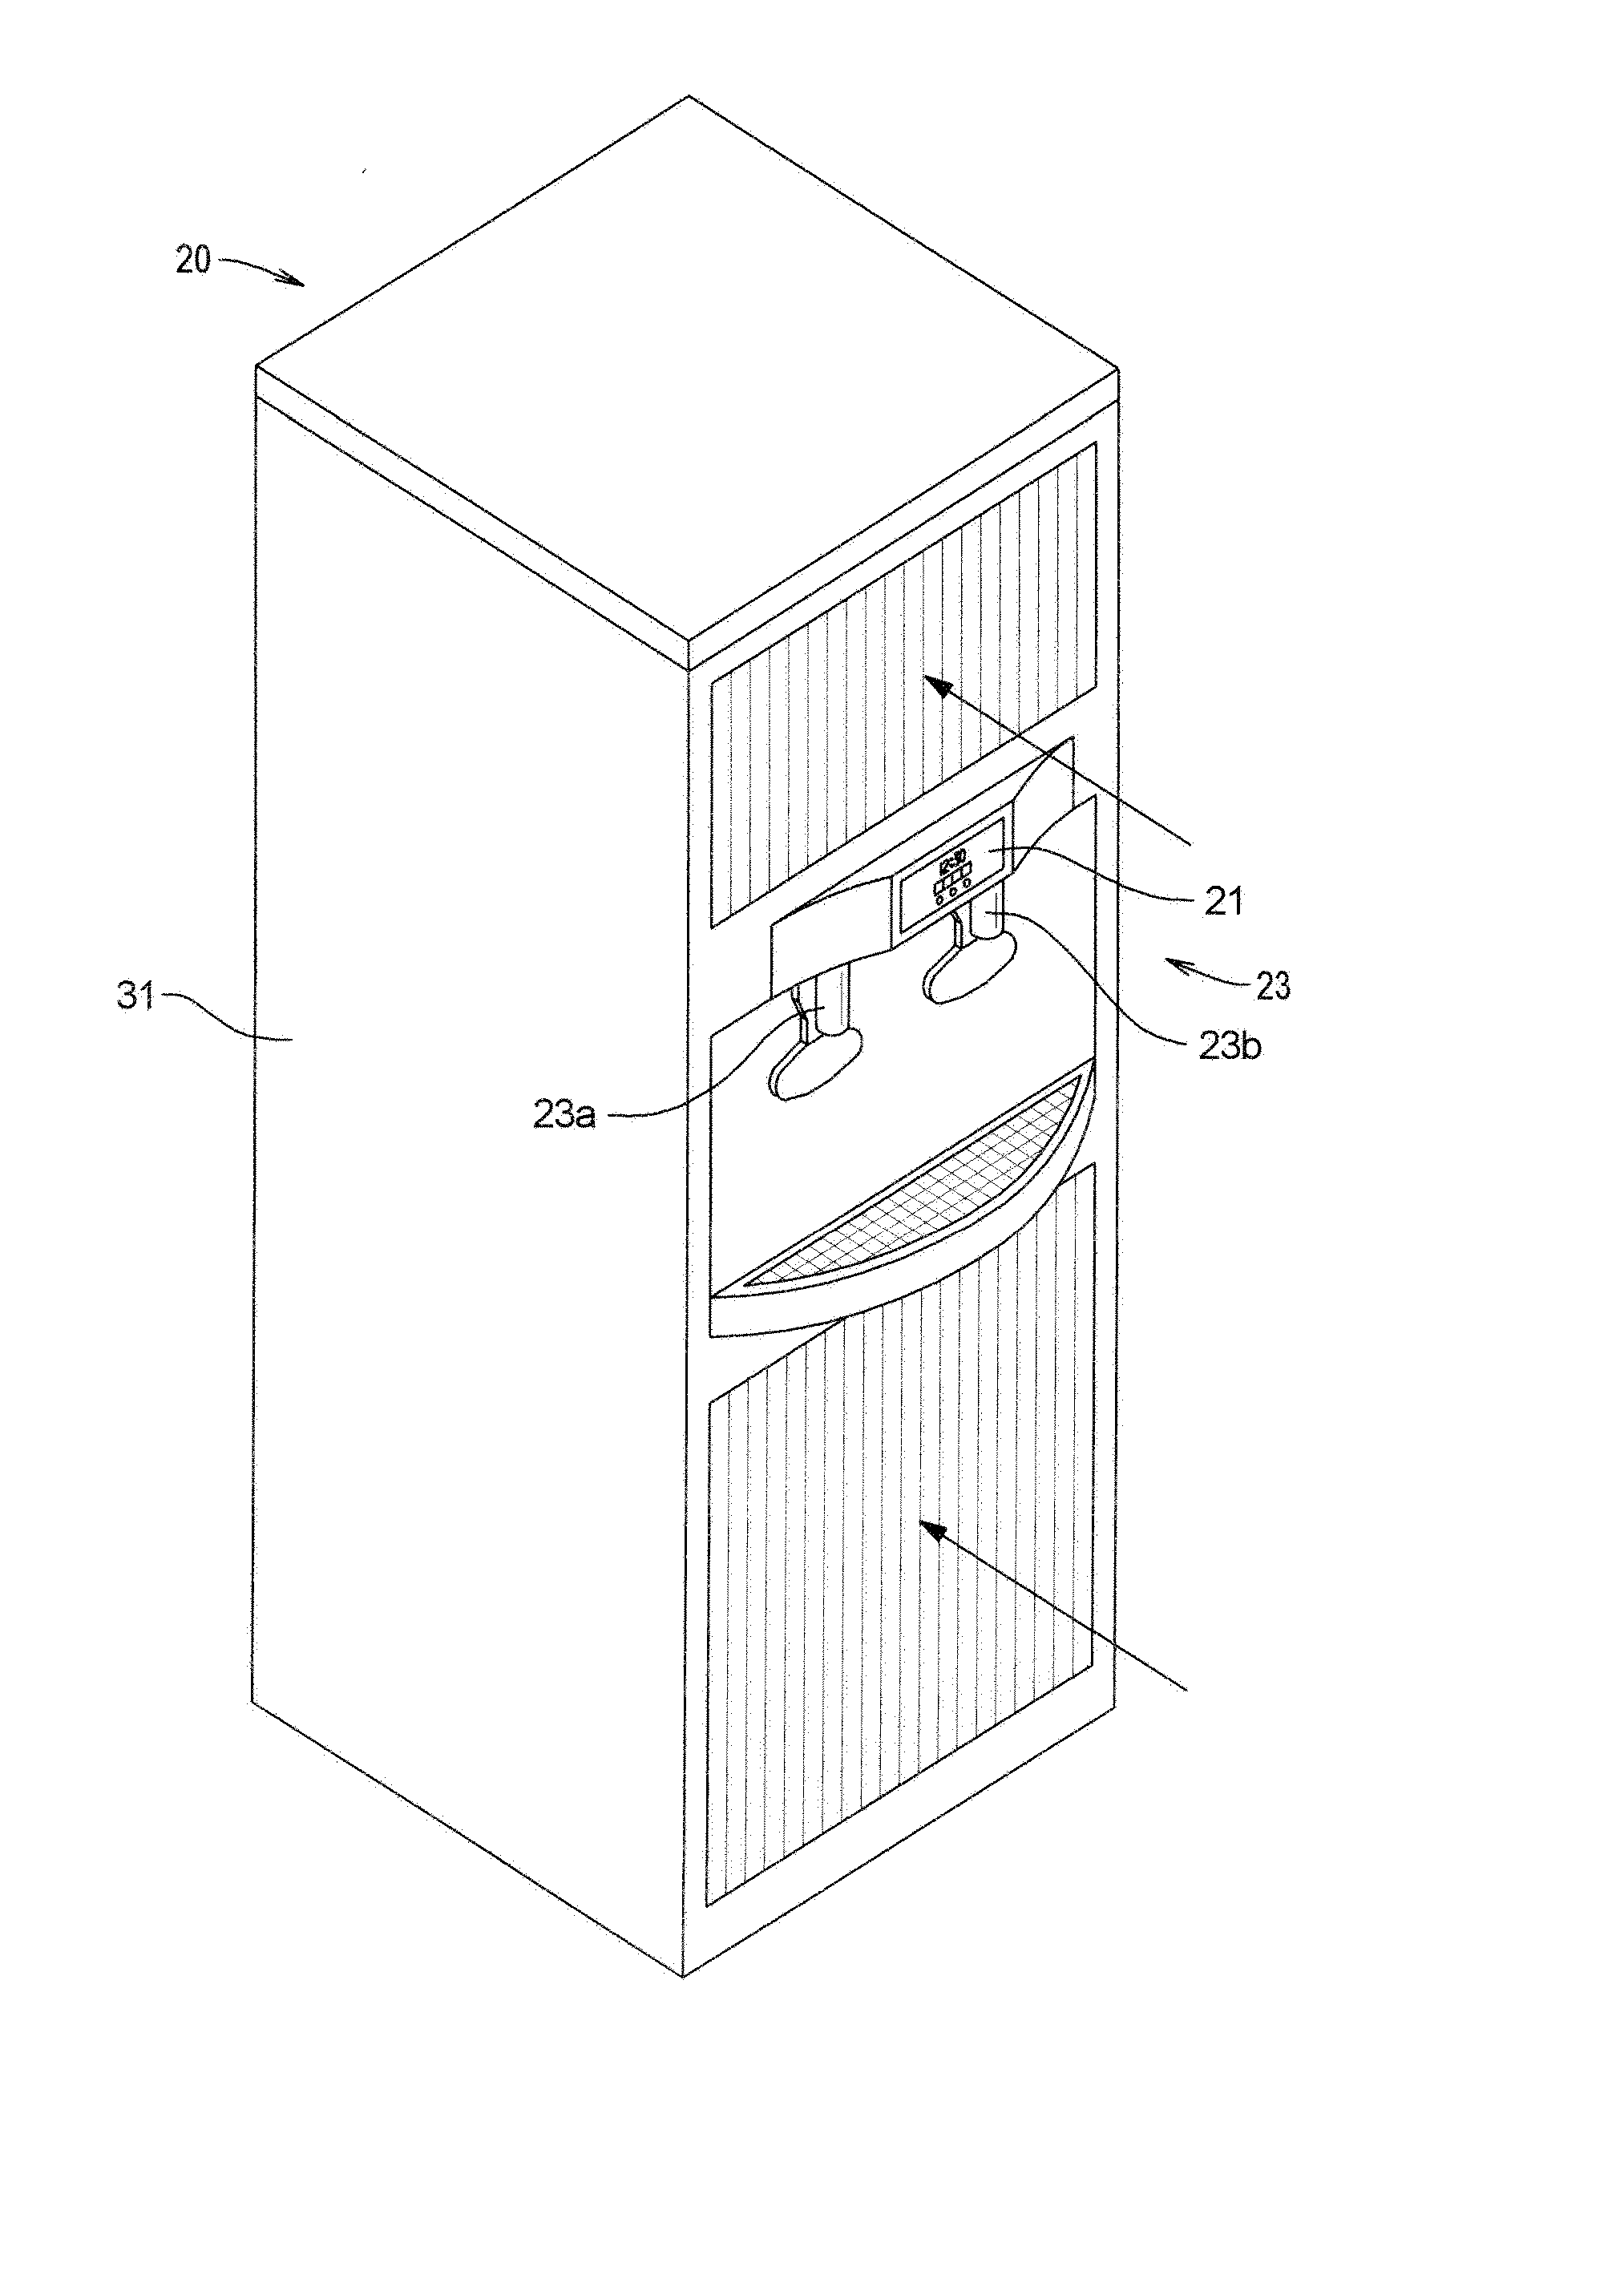 Water producing method and apparatus with additive control system